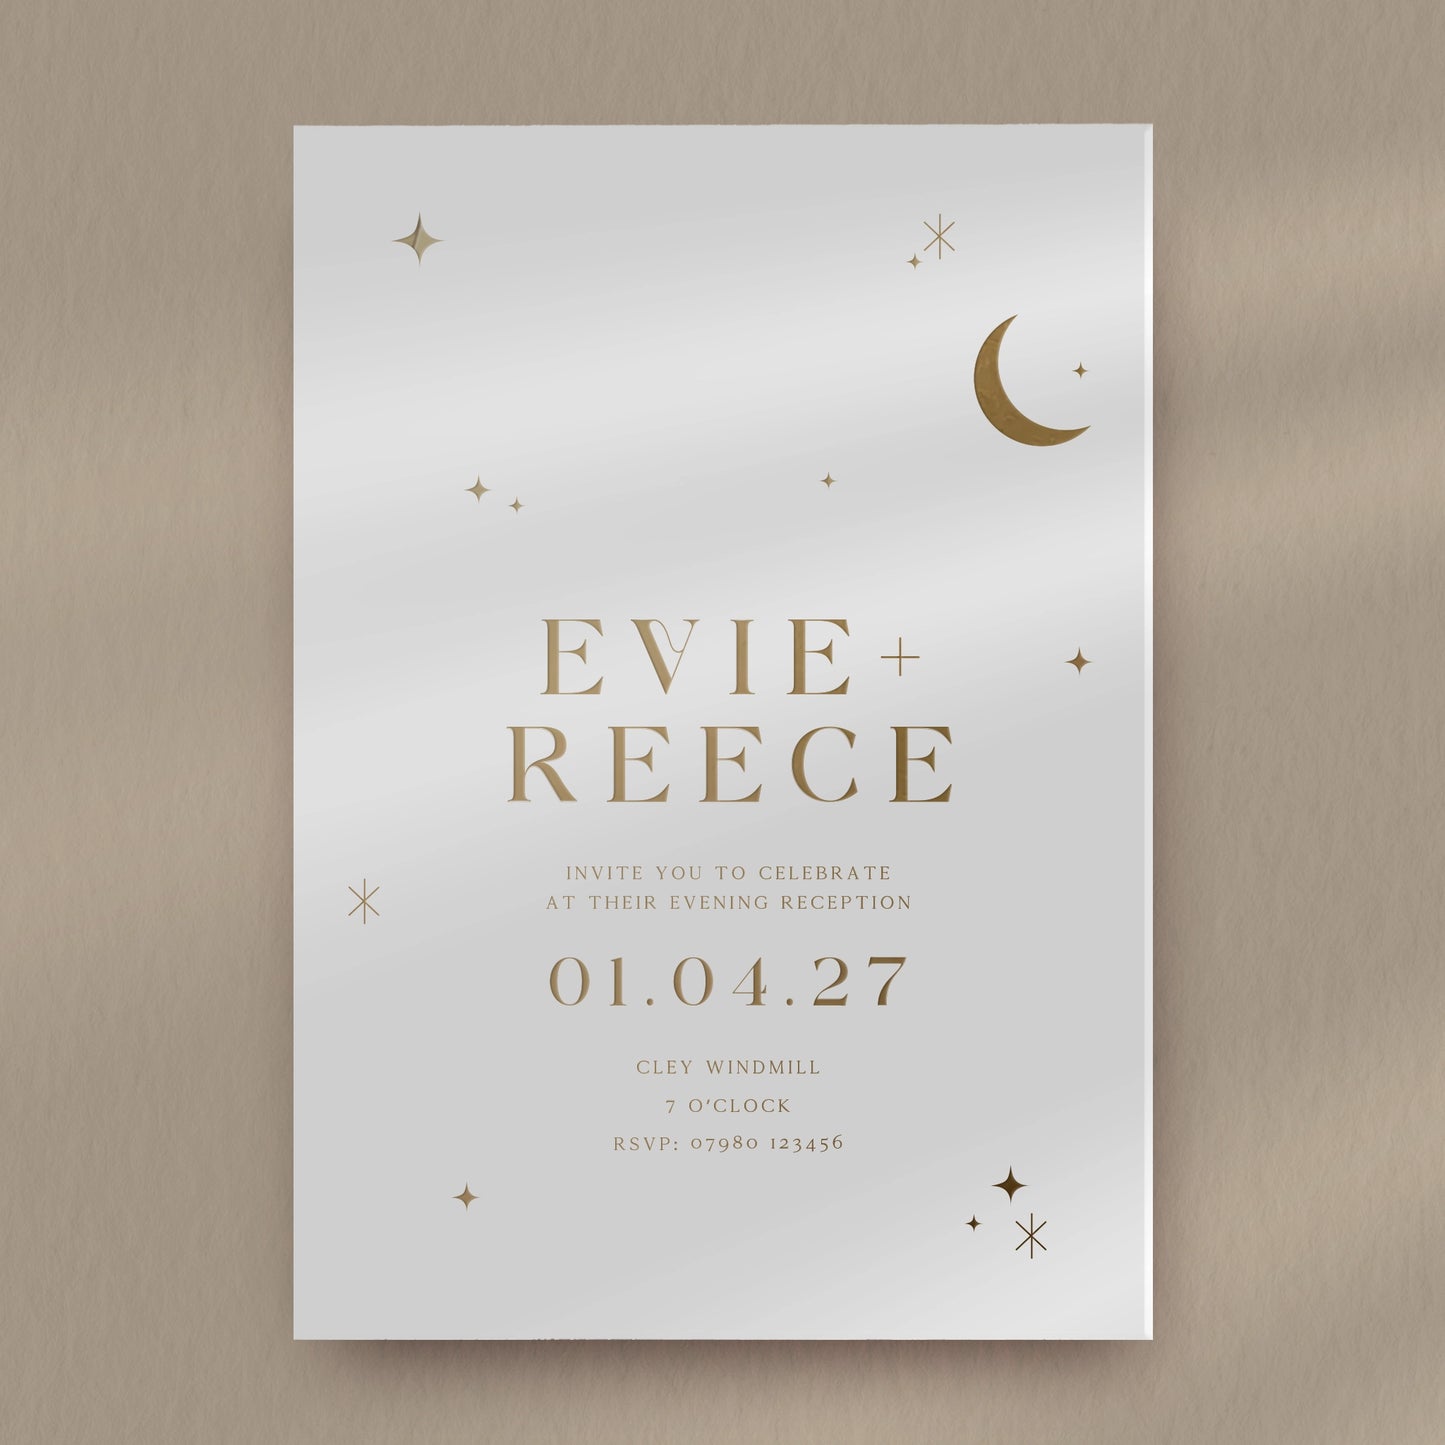 Evening Invitation Sample  Ivy and Gold Wedding Stationery Evie  